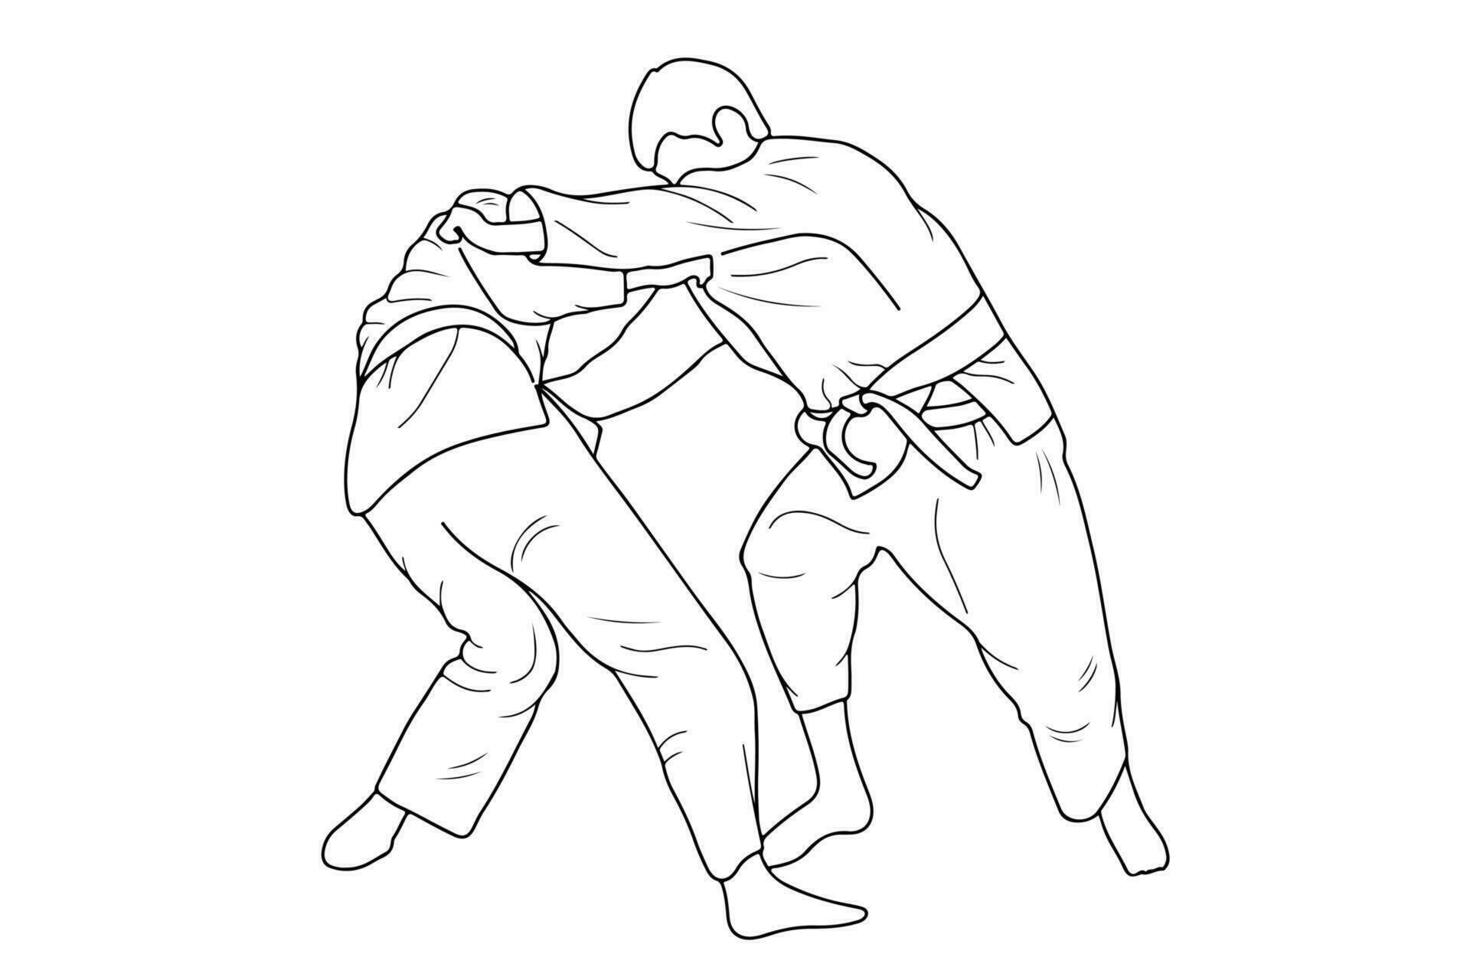 Line drawing of two young sportive judoka fighter. Judoist, judoka, athlete, duel, fight, judo vector